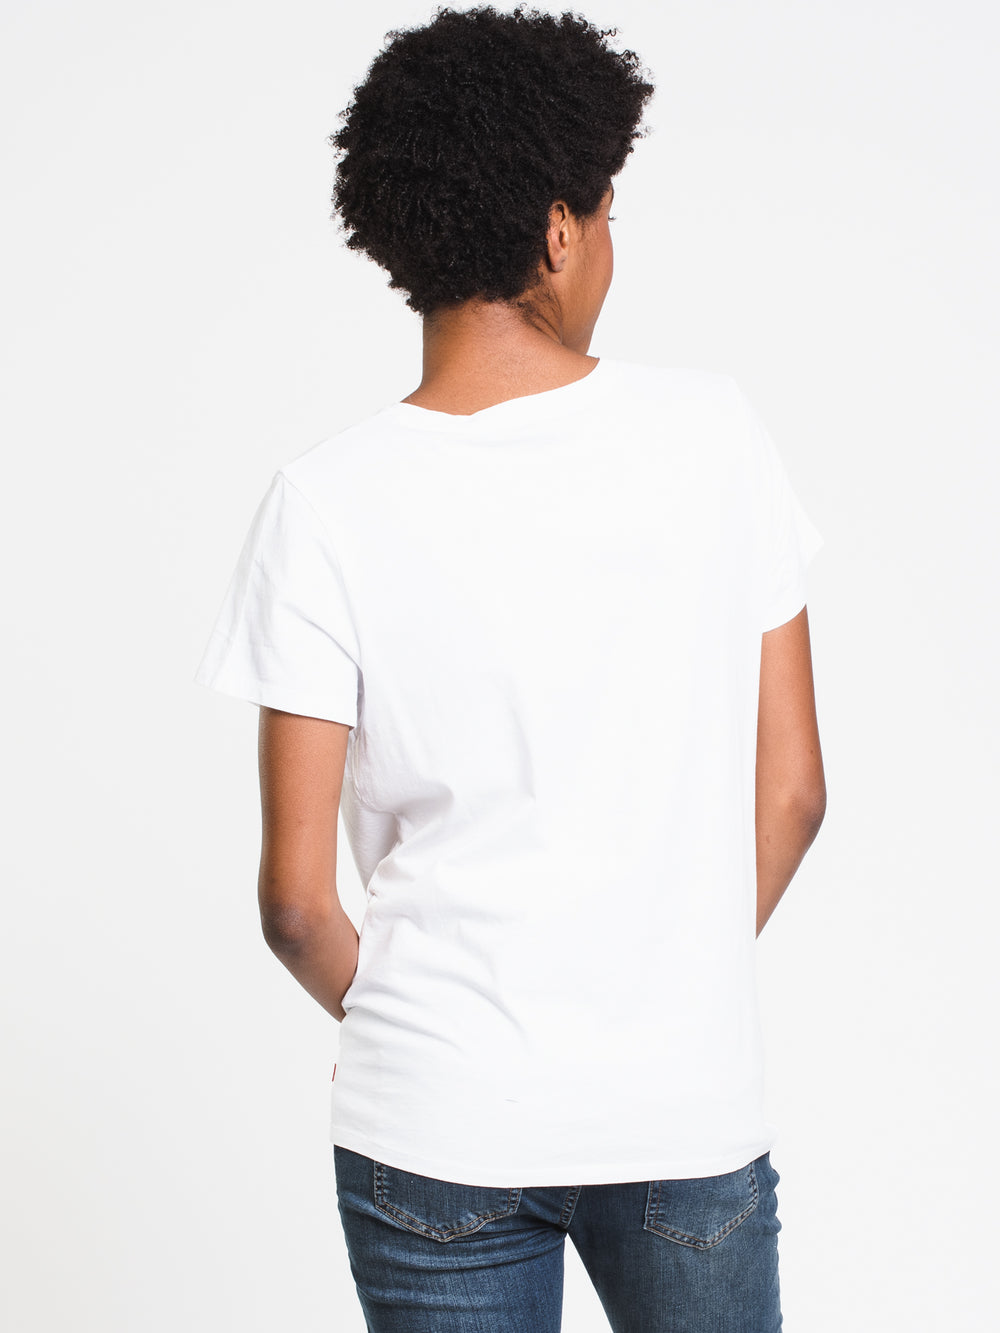 LEVIS BATWING PERFECT T-SHIRT  - CLEARANCE